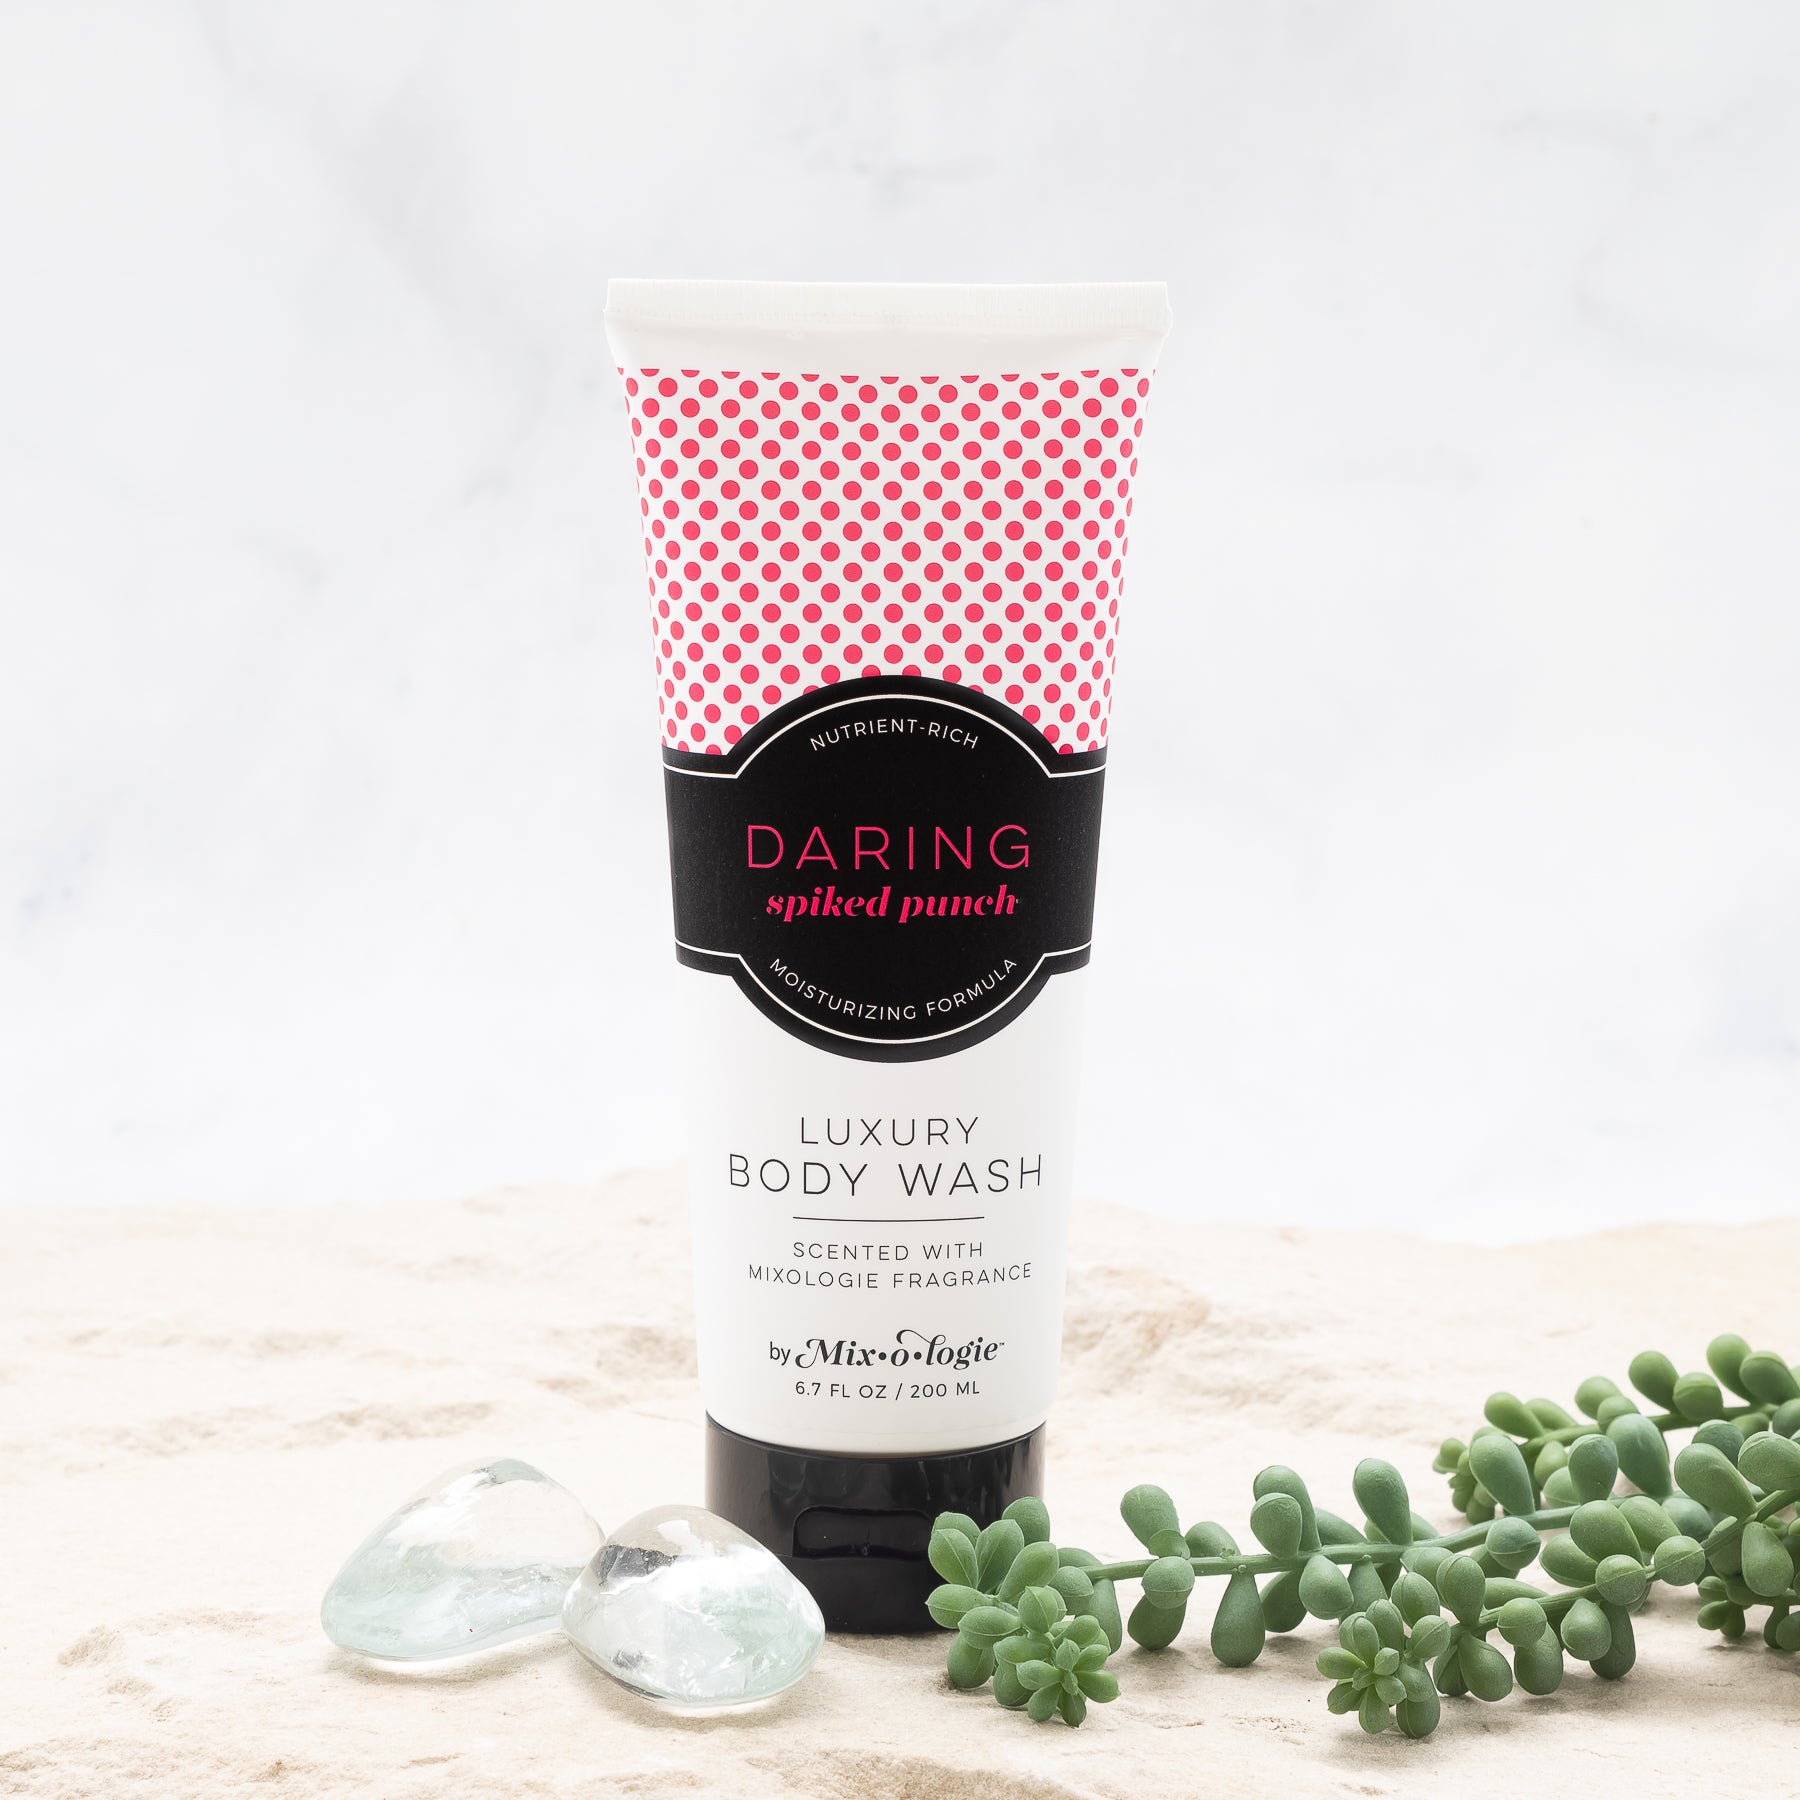 Luxury Body Wash in Mixologie’s Daring (Spiked Punch) in bright pink color sample package with black label. Contains 6.7 fl oz or 200 mL pictured on a white background. 